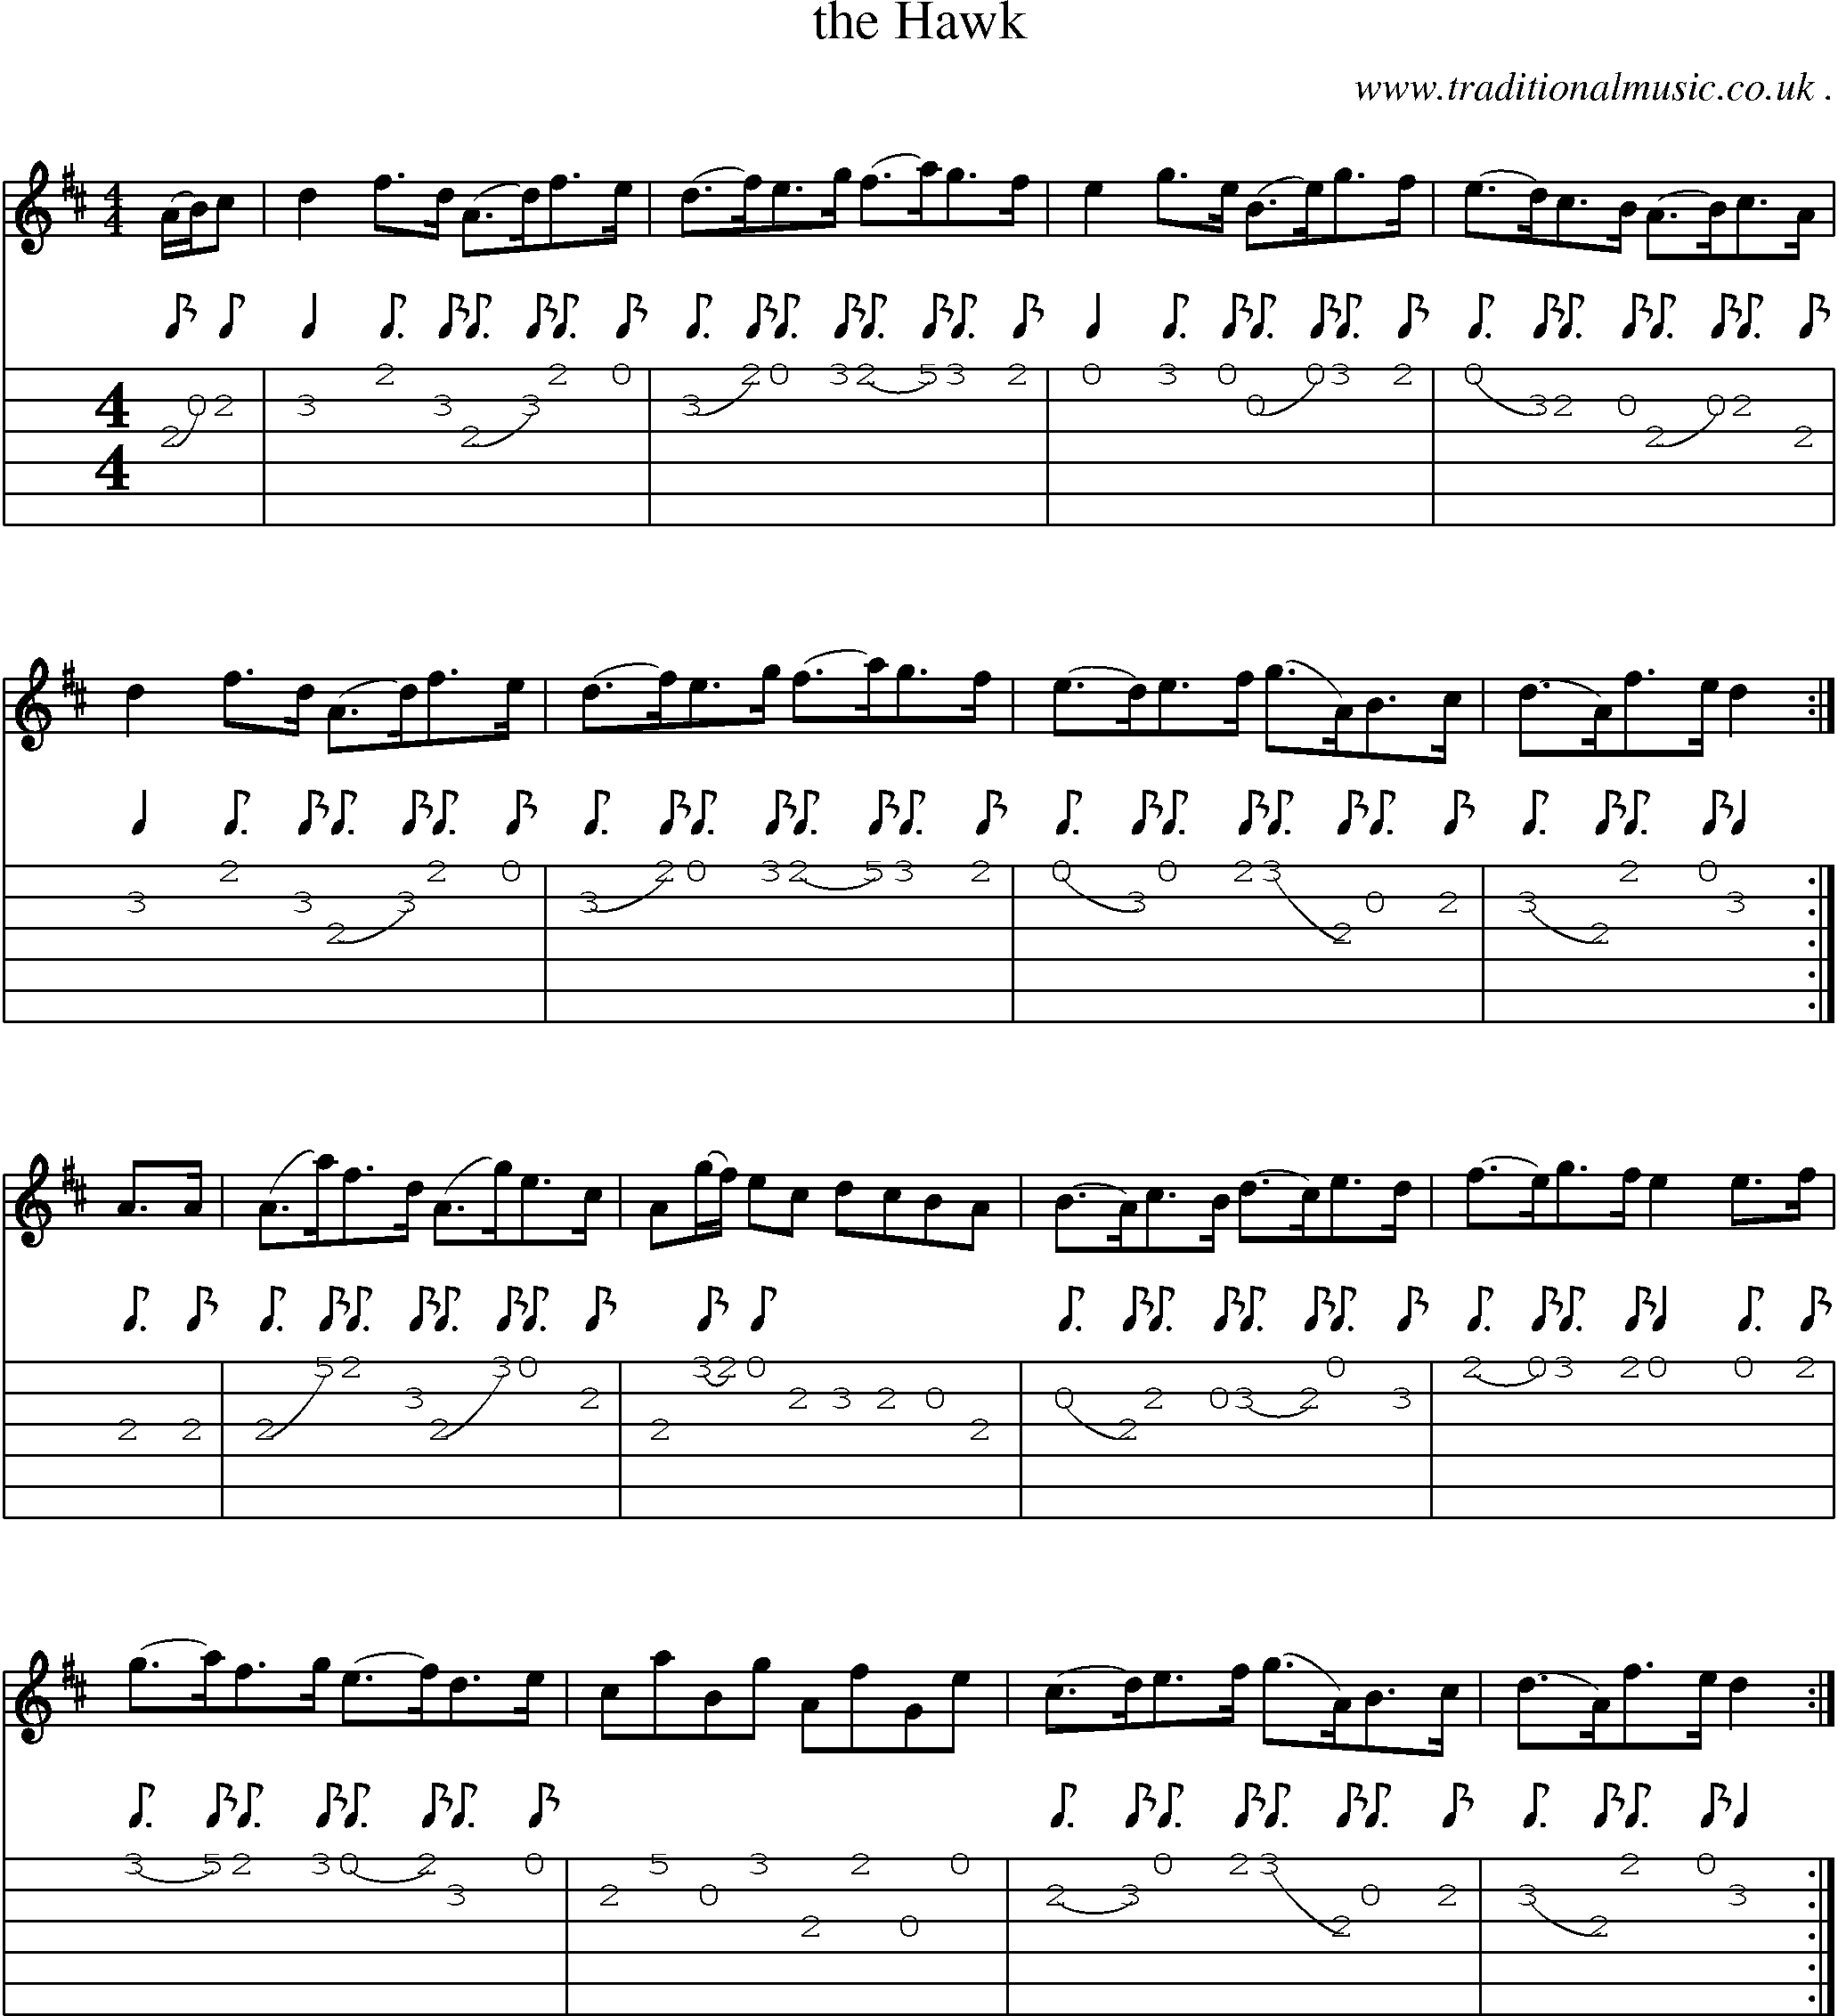 Sheet-music  score, Chords and Guitar Tabs for The Hawk